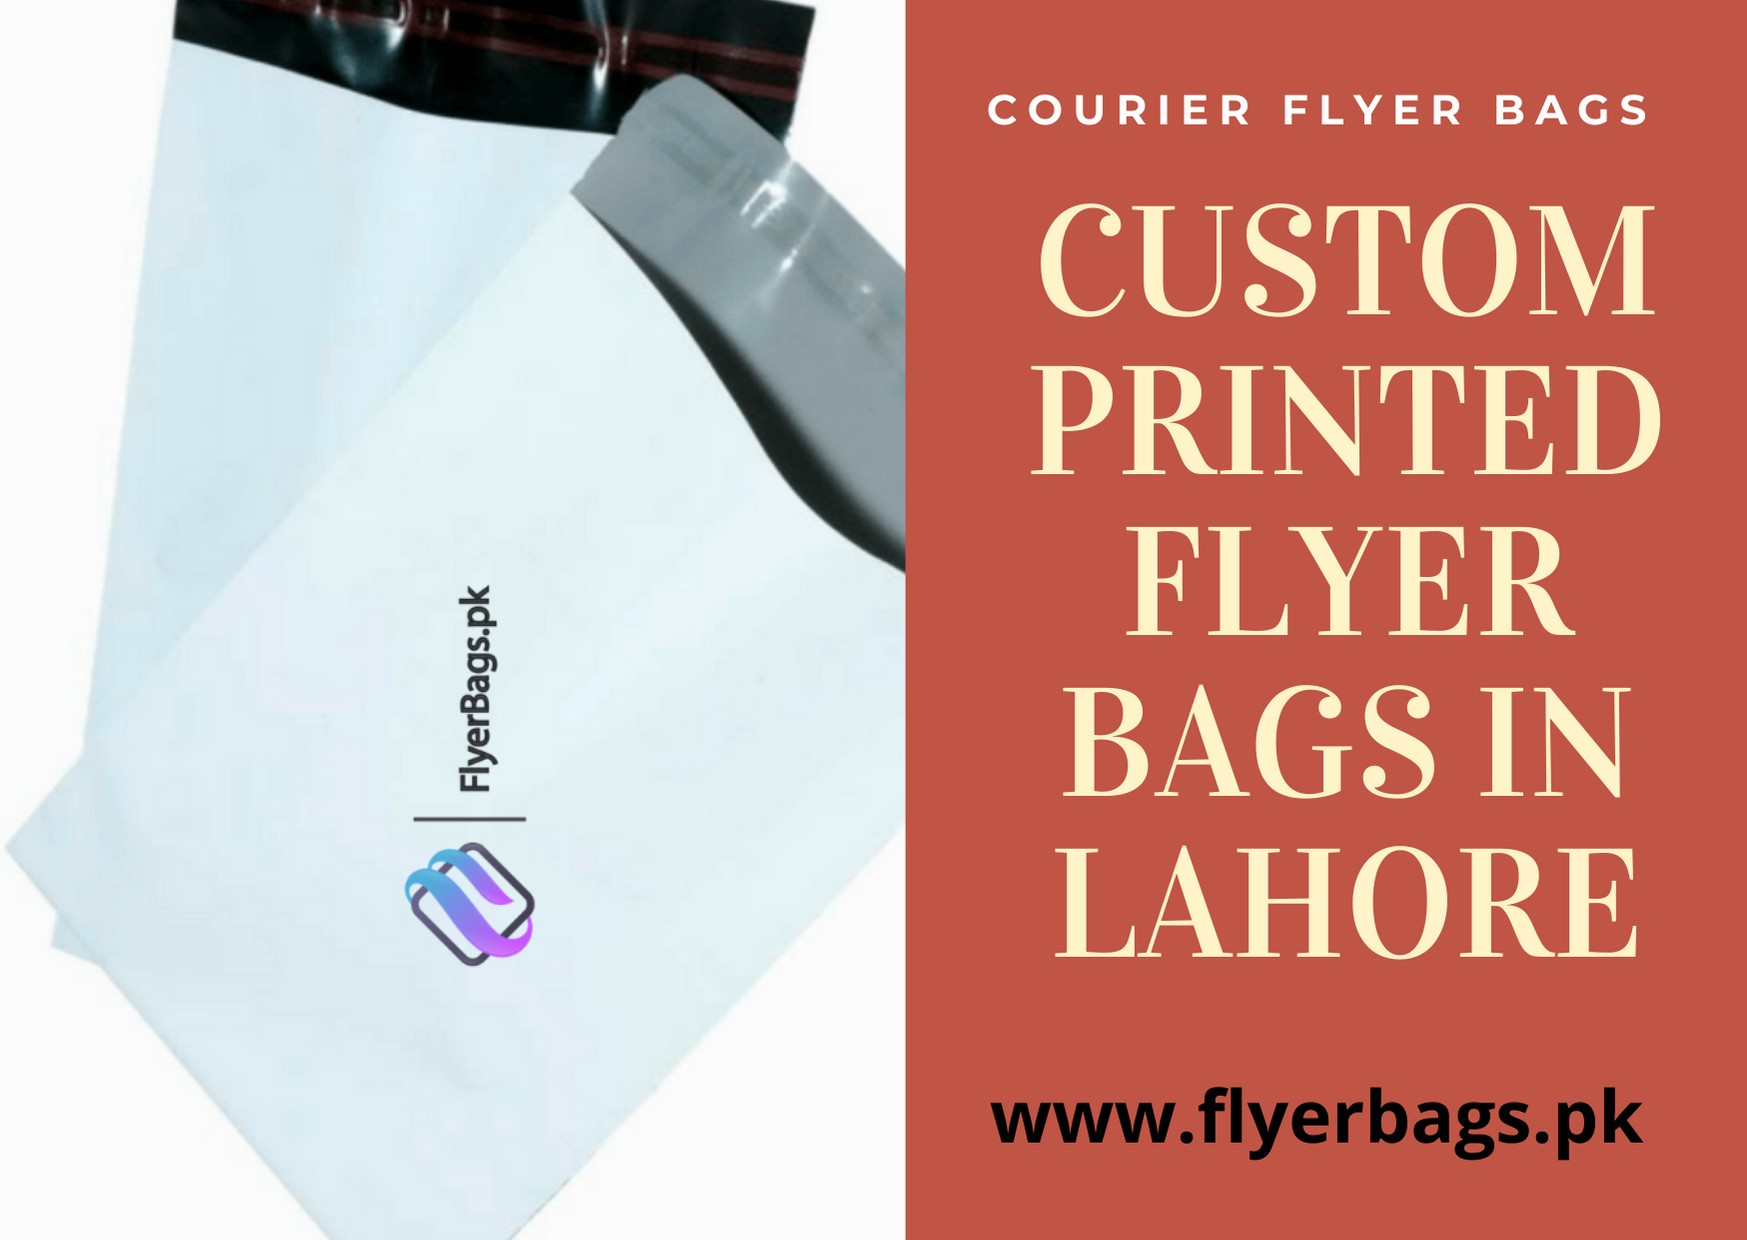 Get high quality courier flyer bags in Pakistan.